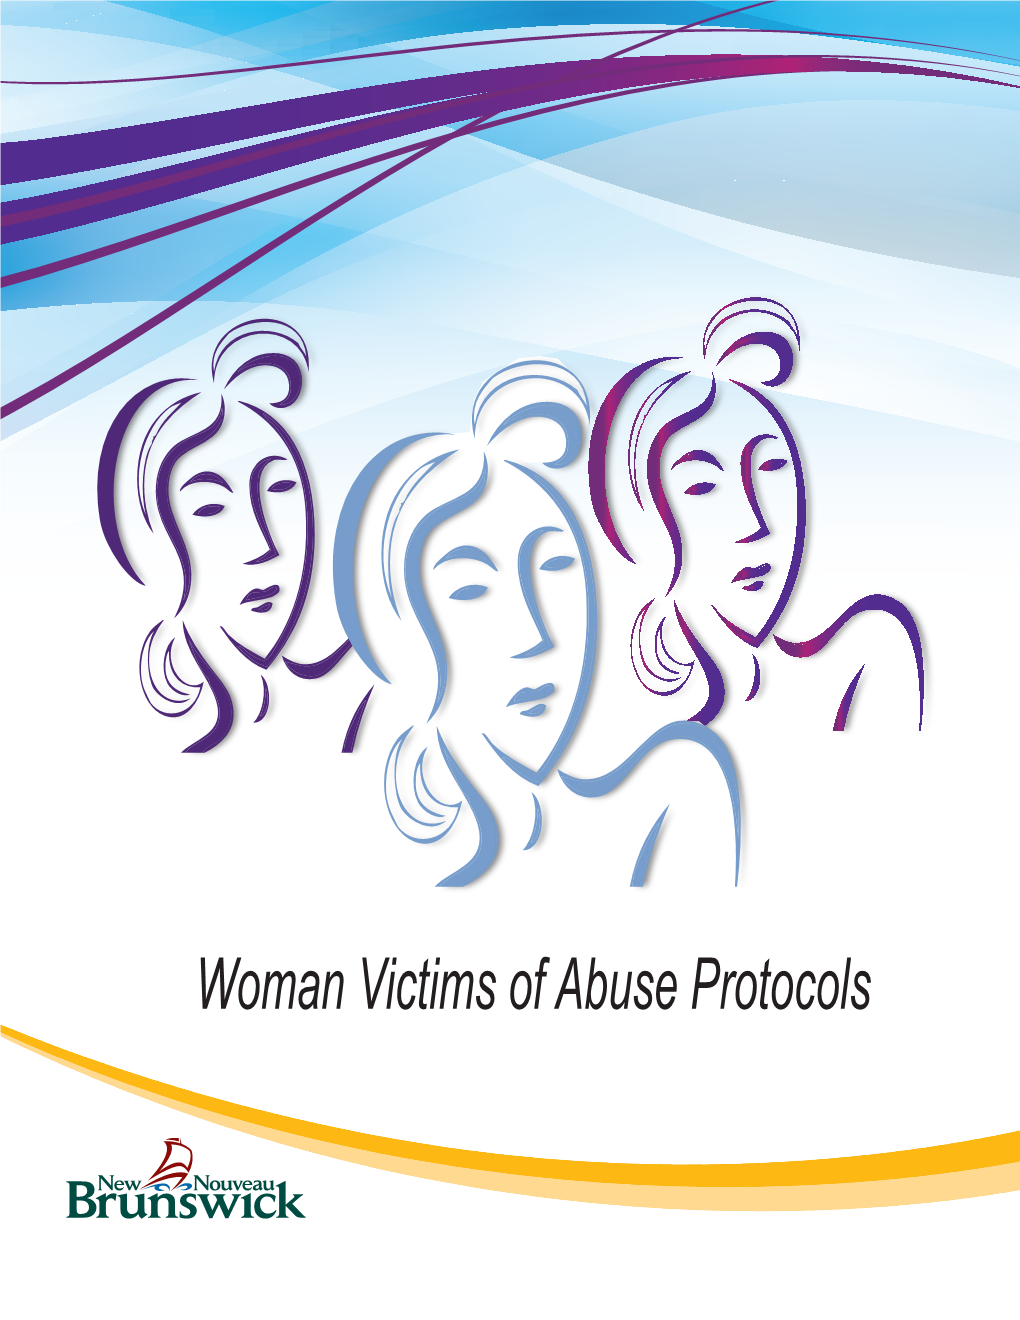 Woman Victims of Abuse Protocols 2014 Table of Contents